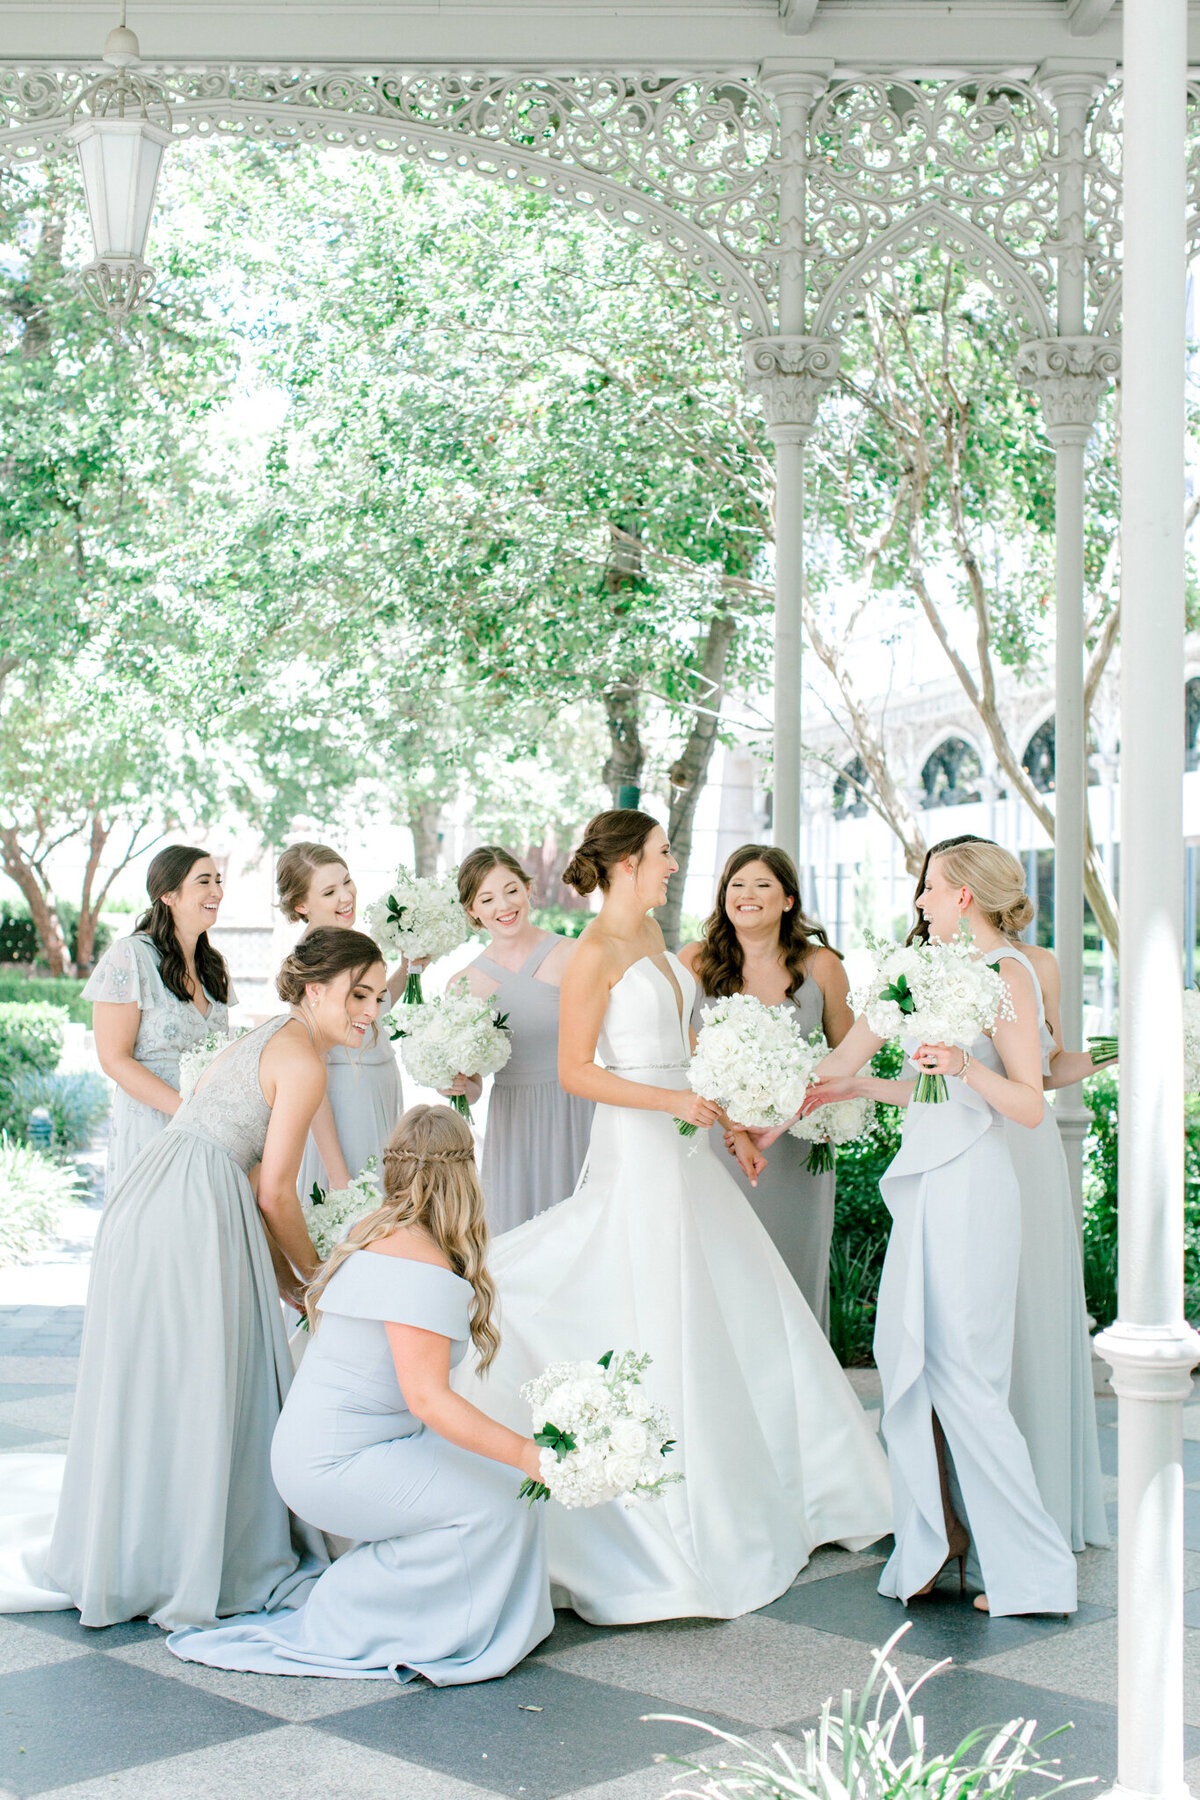 Wedding at the Crescent Court Hotel and Highland Park United Methodist Church in Dallas | Sami Kathryn Photography | DFW Wedding Photographer-8